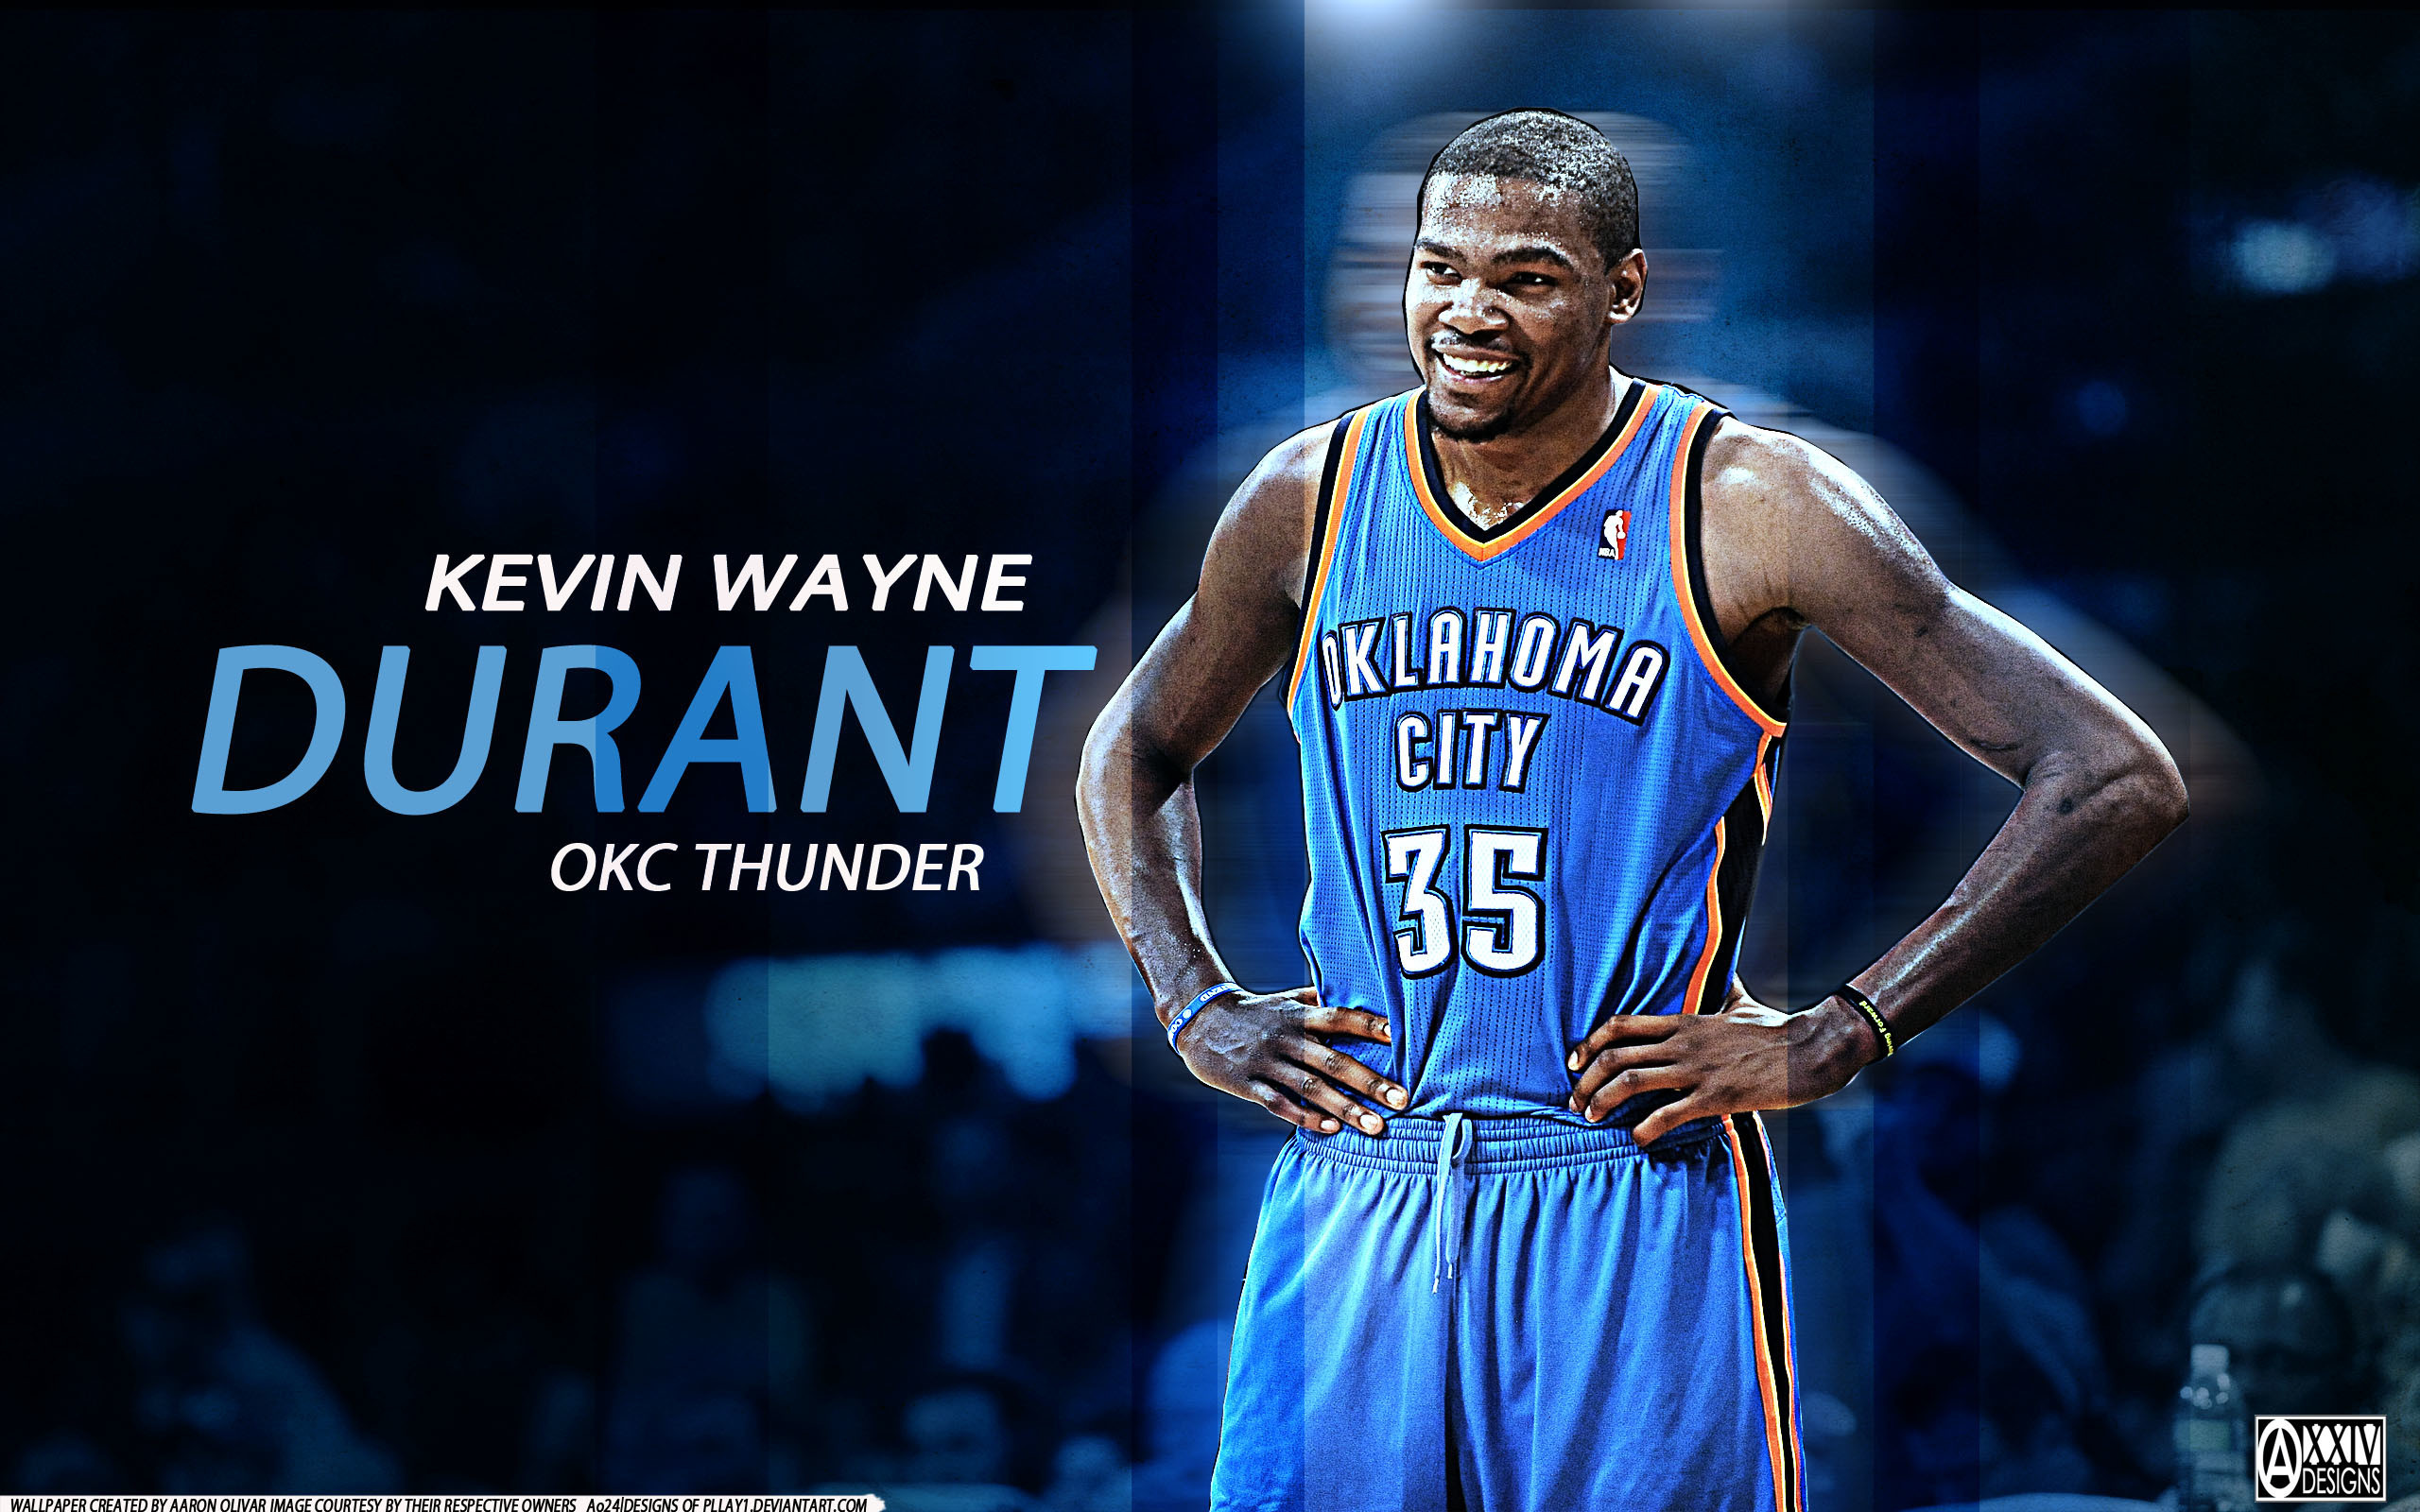 HD wallpaper: kevin durant cool pictures, one person, sport, front